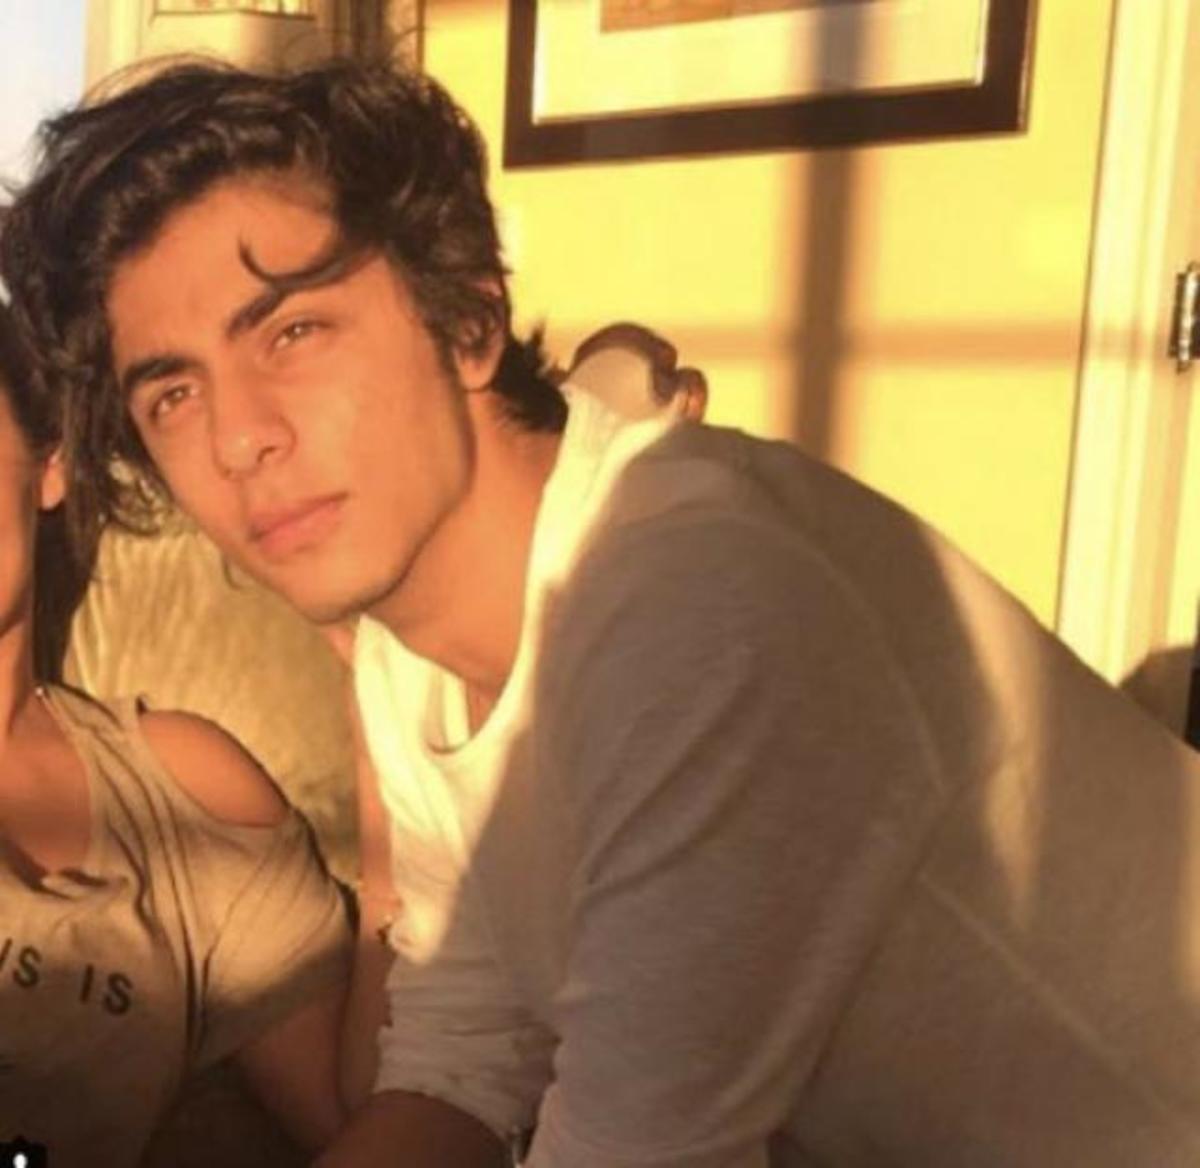 Aryan Khan: Father- Shah Rukh Khan'  He is accused in a drug case recently